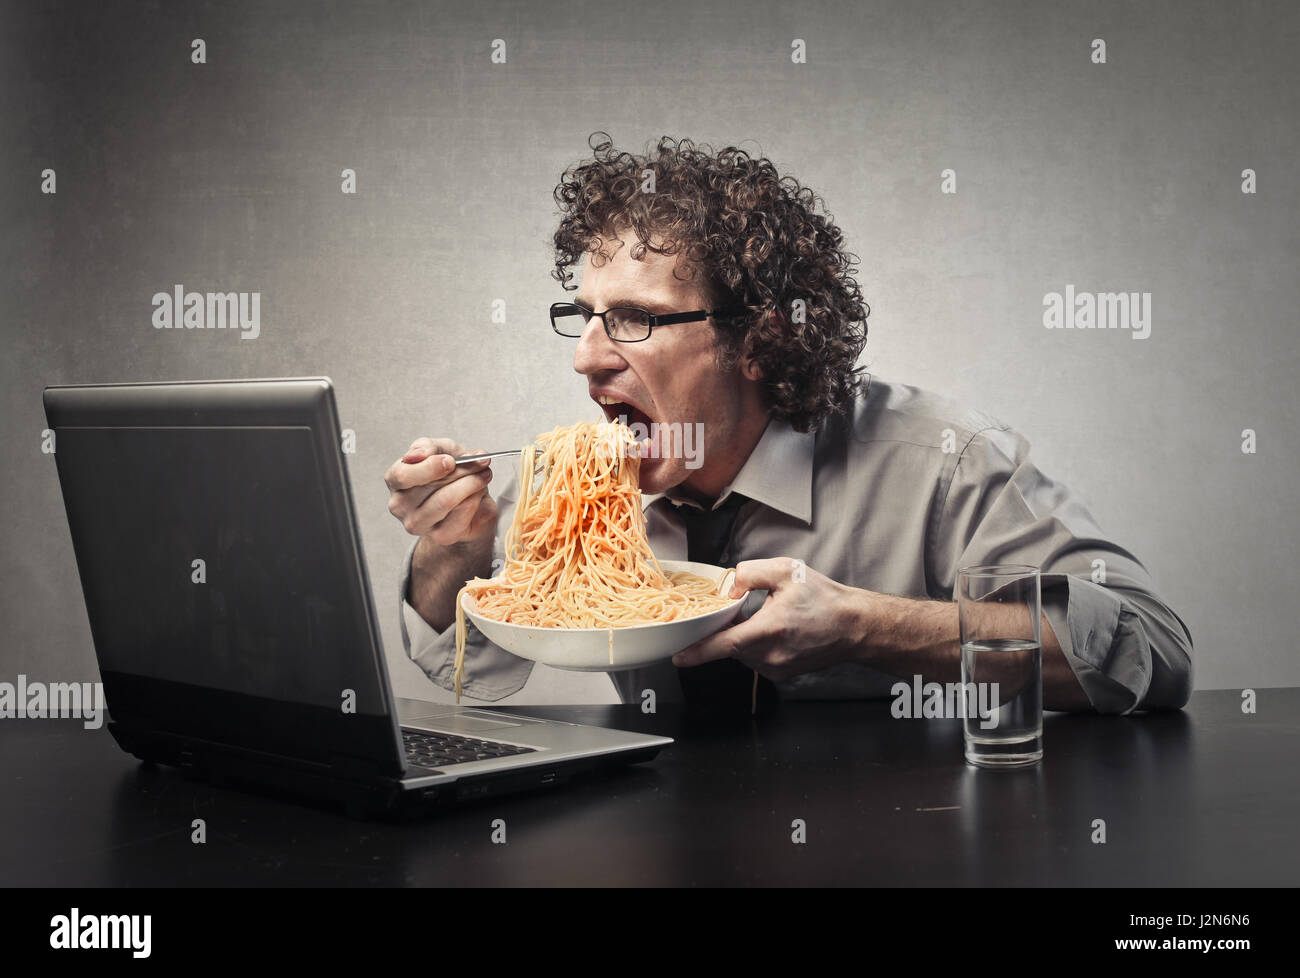 Man eating pasta in front of laptop Stock Photo